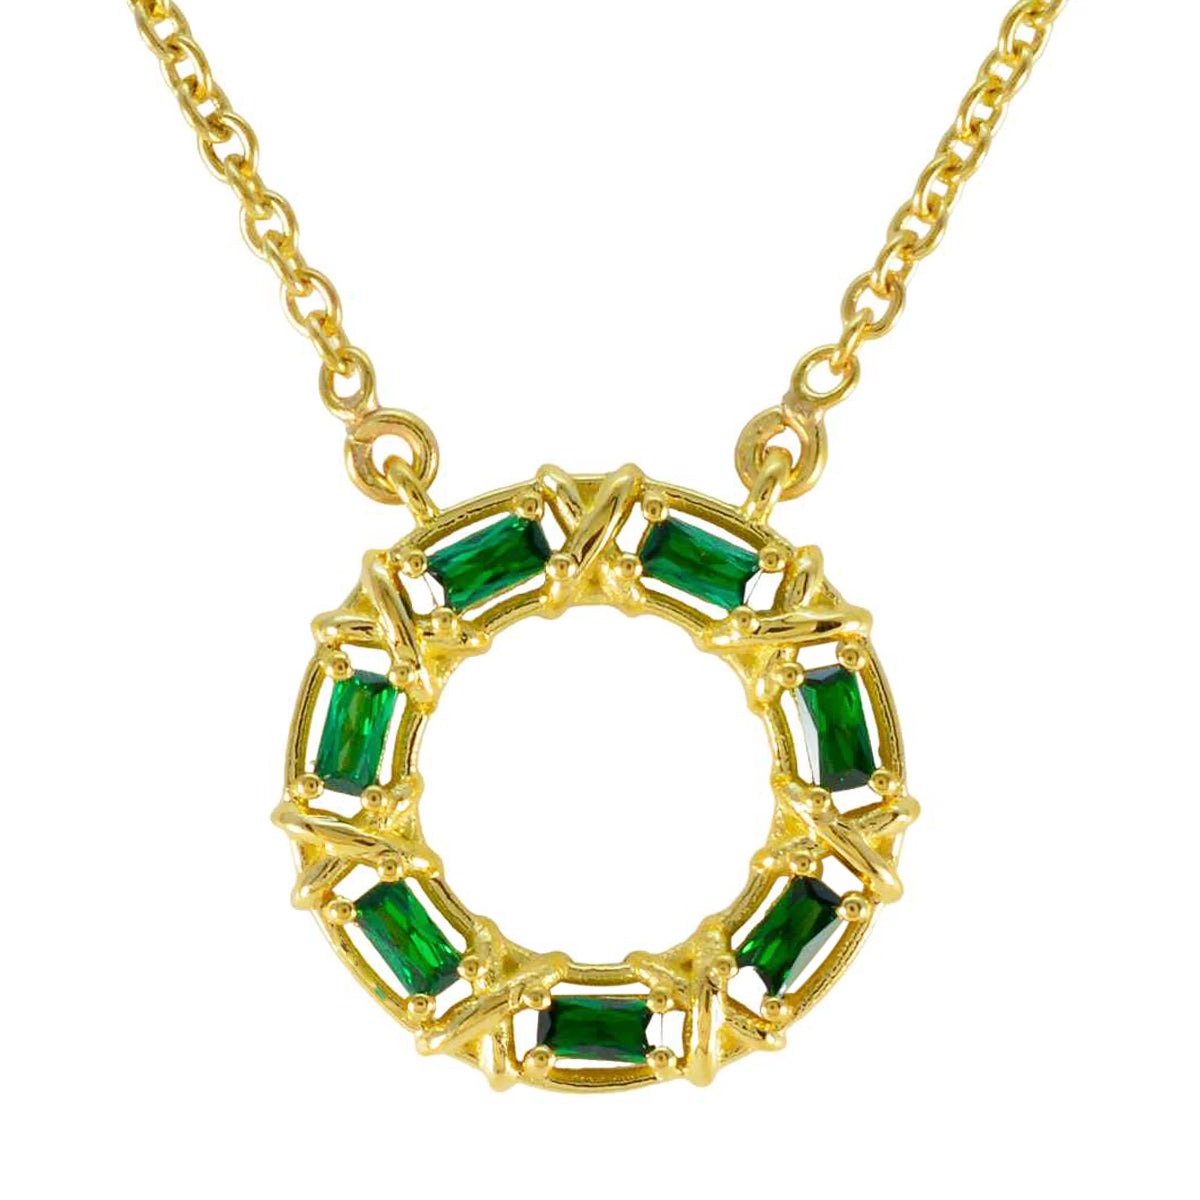 Riyo Genuine Gems Baguette Faceted Green Emerald Cz Silver Pendant Gift For Boxing Day